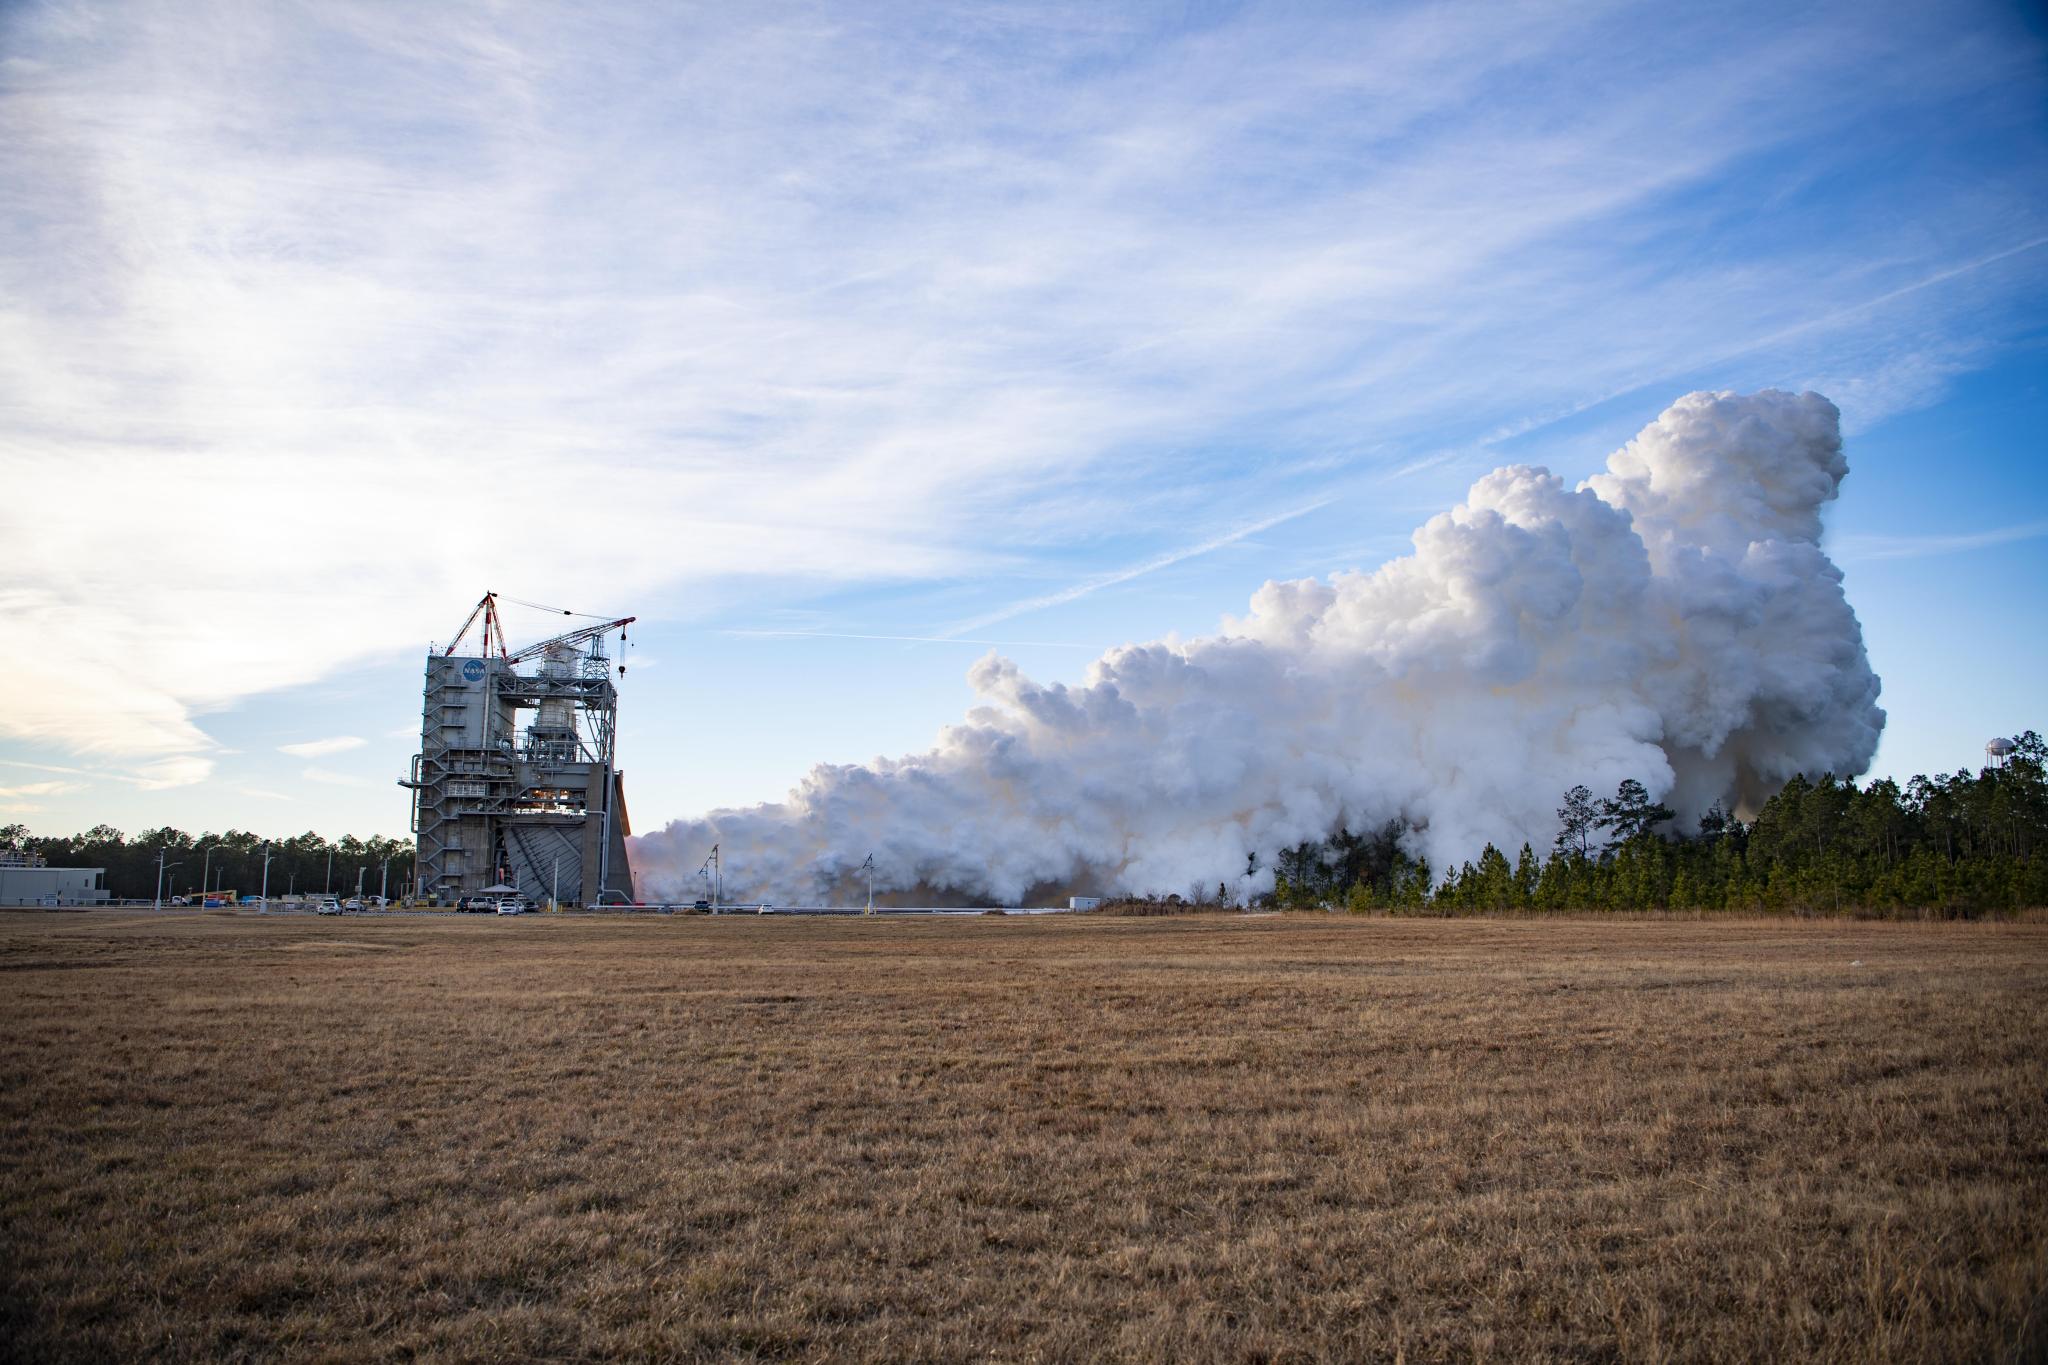 distant view of a hot fire of an RS-25 certification engine